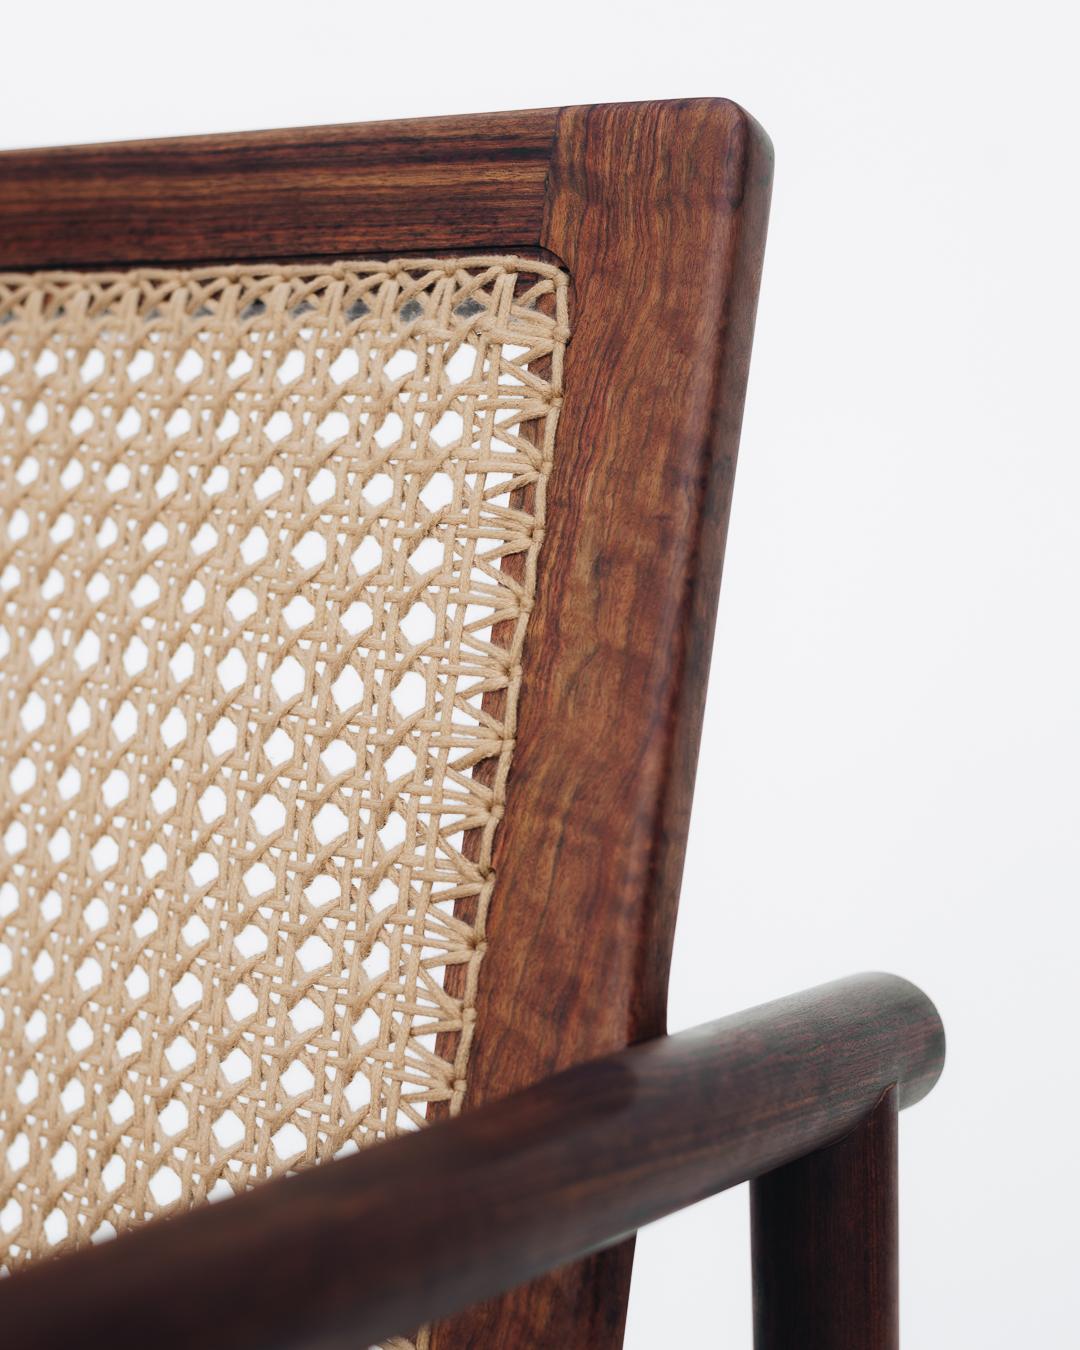 Hand-Woven Contemporary Chair in Chechén Tropical Wood For Sale 2